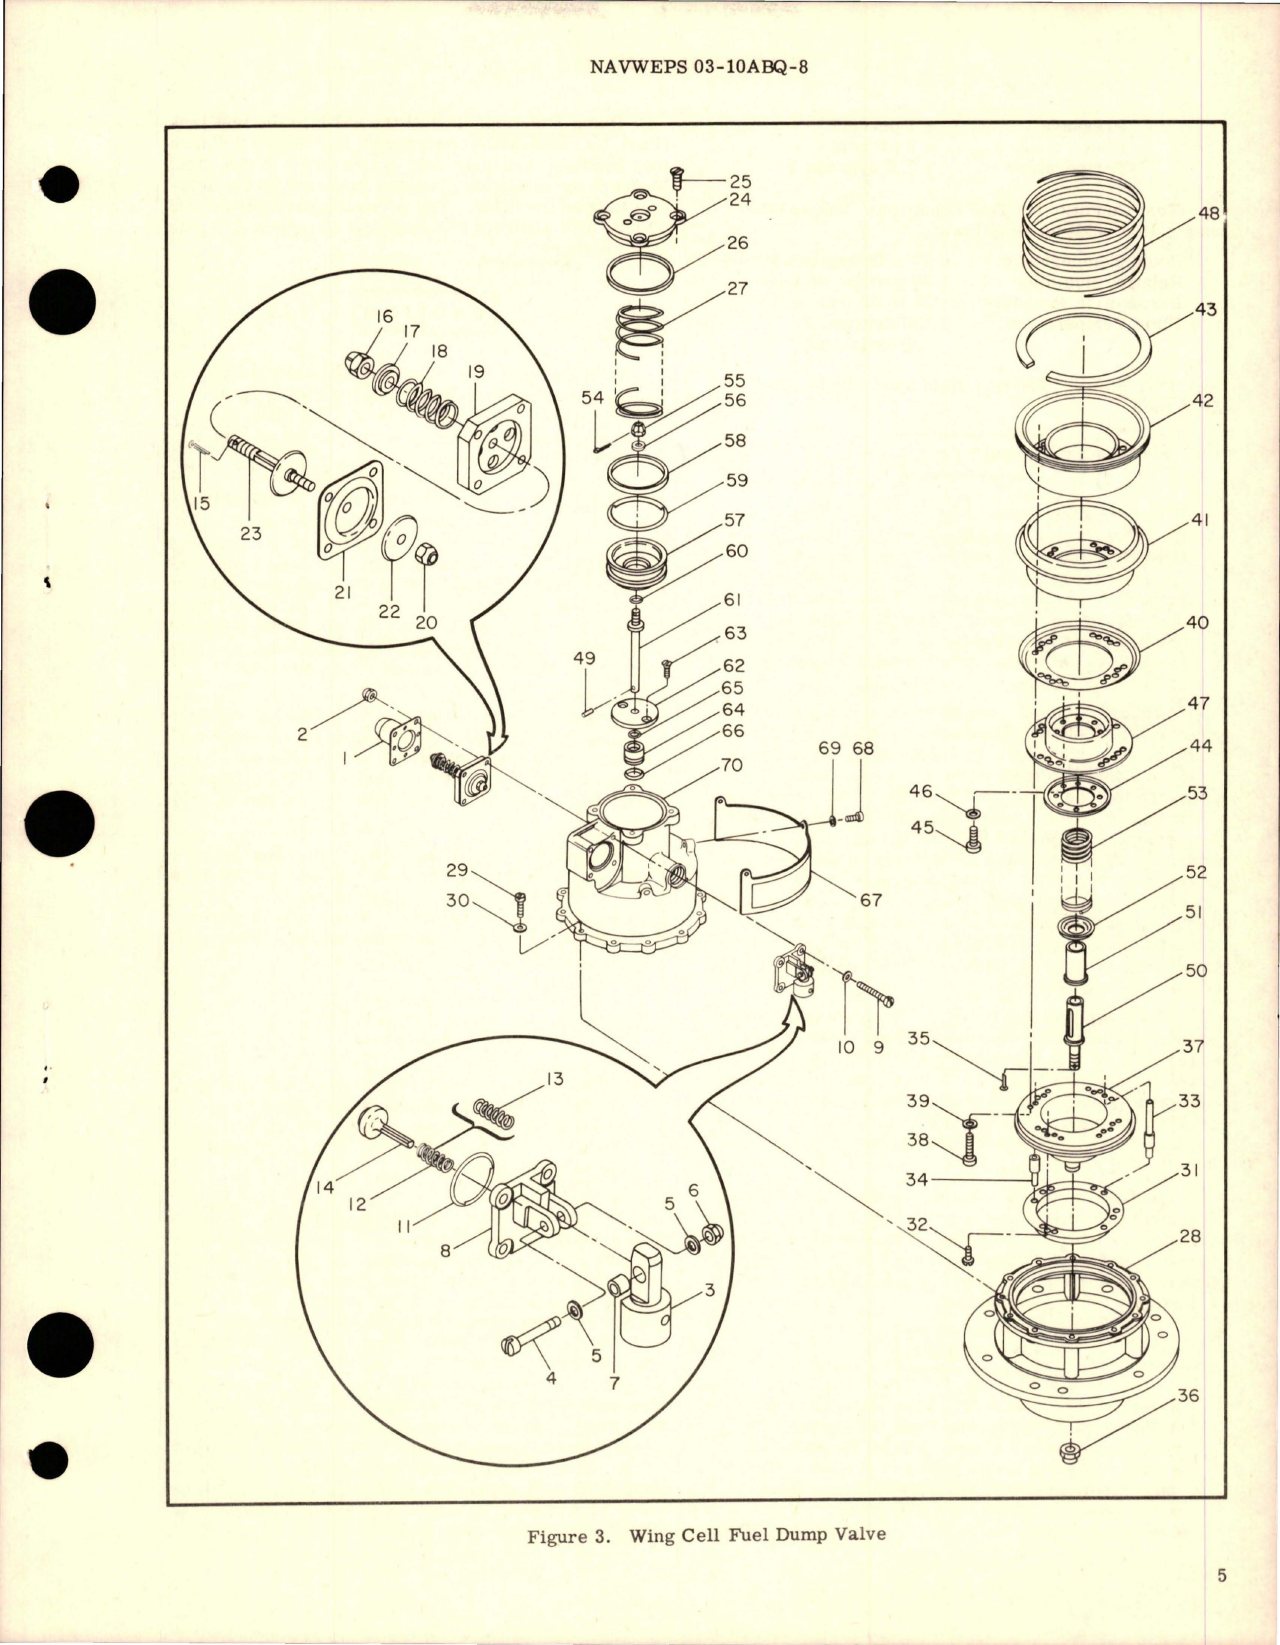 Sample page 5 from AirCorps Library document: Overhaul Instructions with Parts Breakdown for Wing Cell Fuel Dump Valve - Parts 1-111655 and 1-111655R